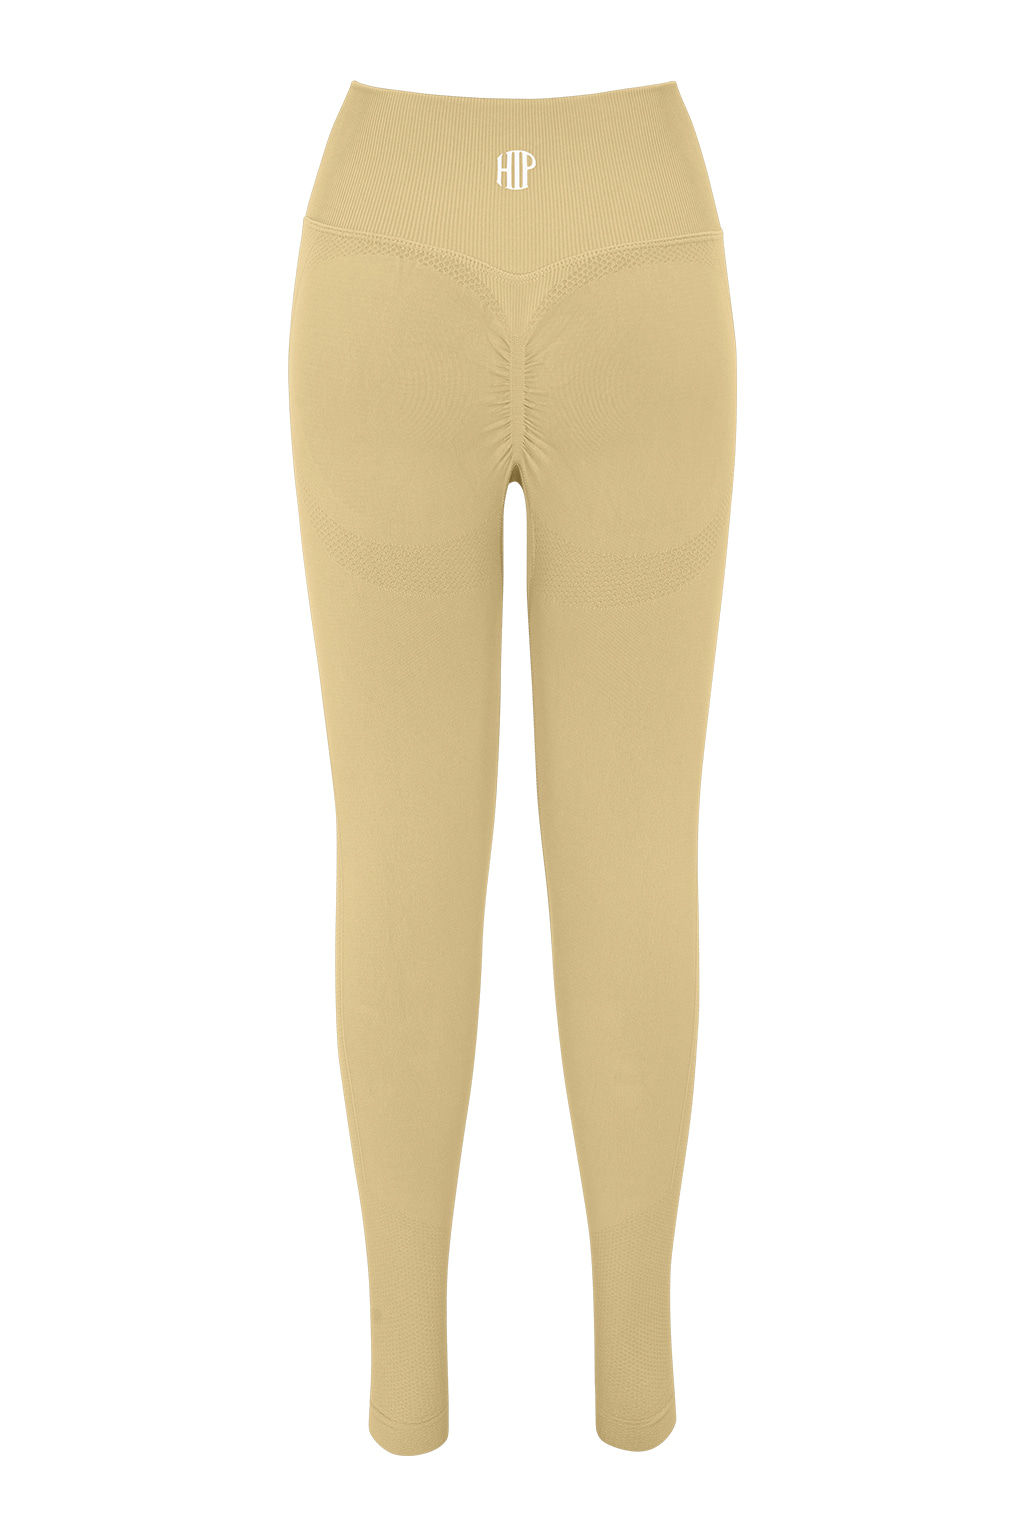 Power Support Hip-Up Leggings Yellow Beige